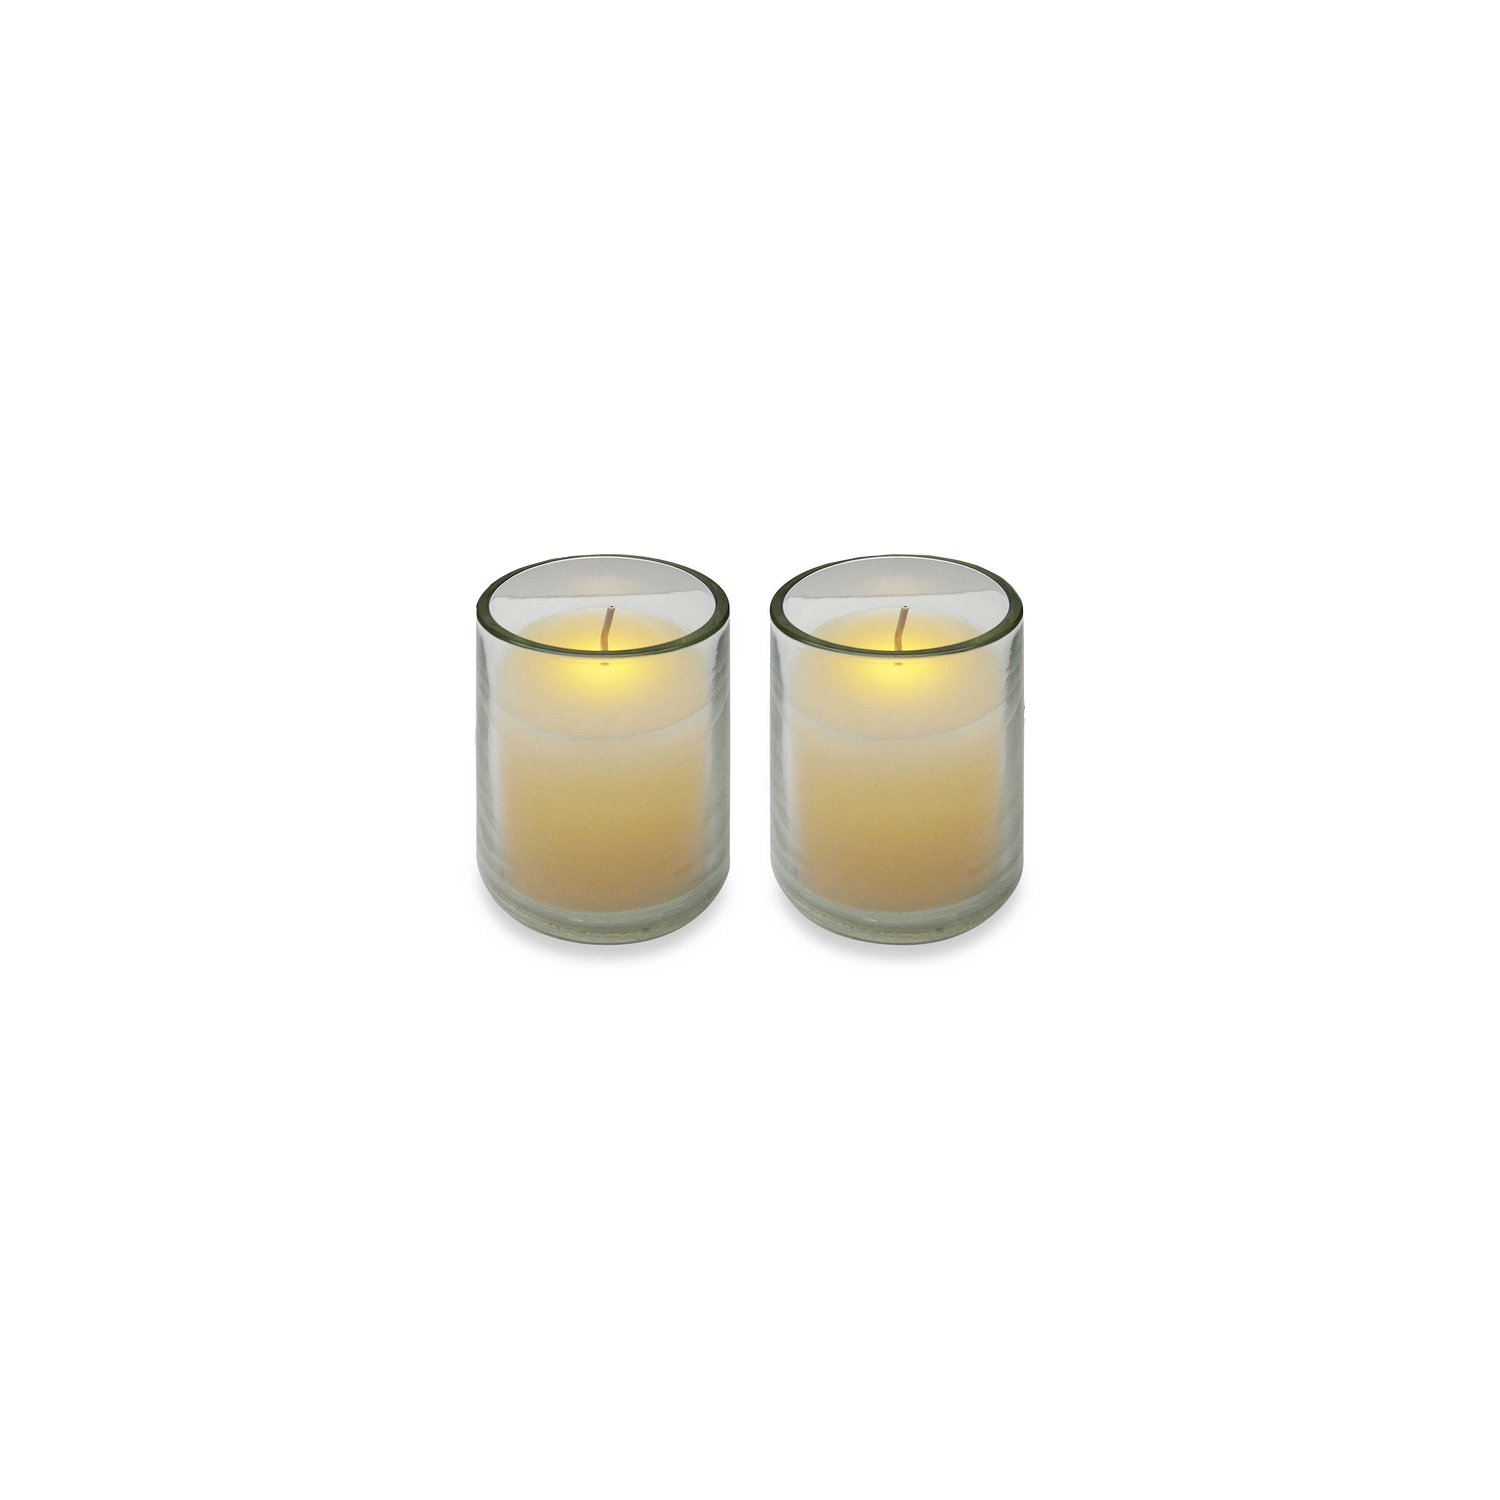 Pack of 2 Cream Battery Operated Flameless LED Flickering Wax Votive Candles